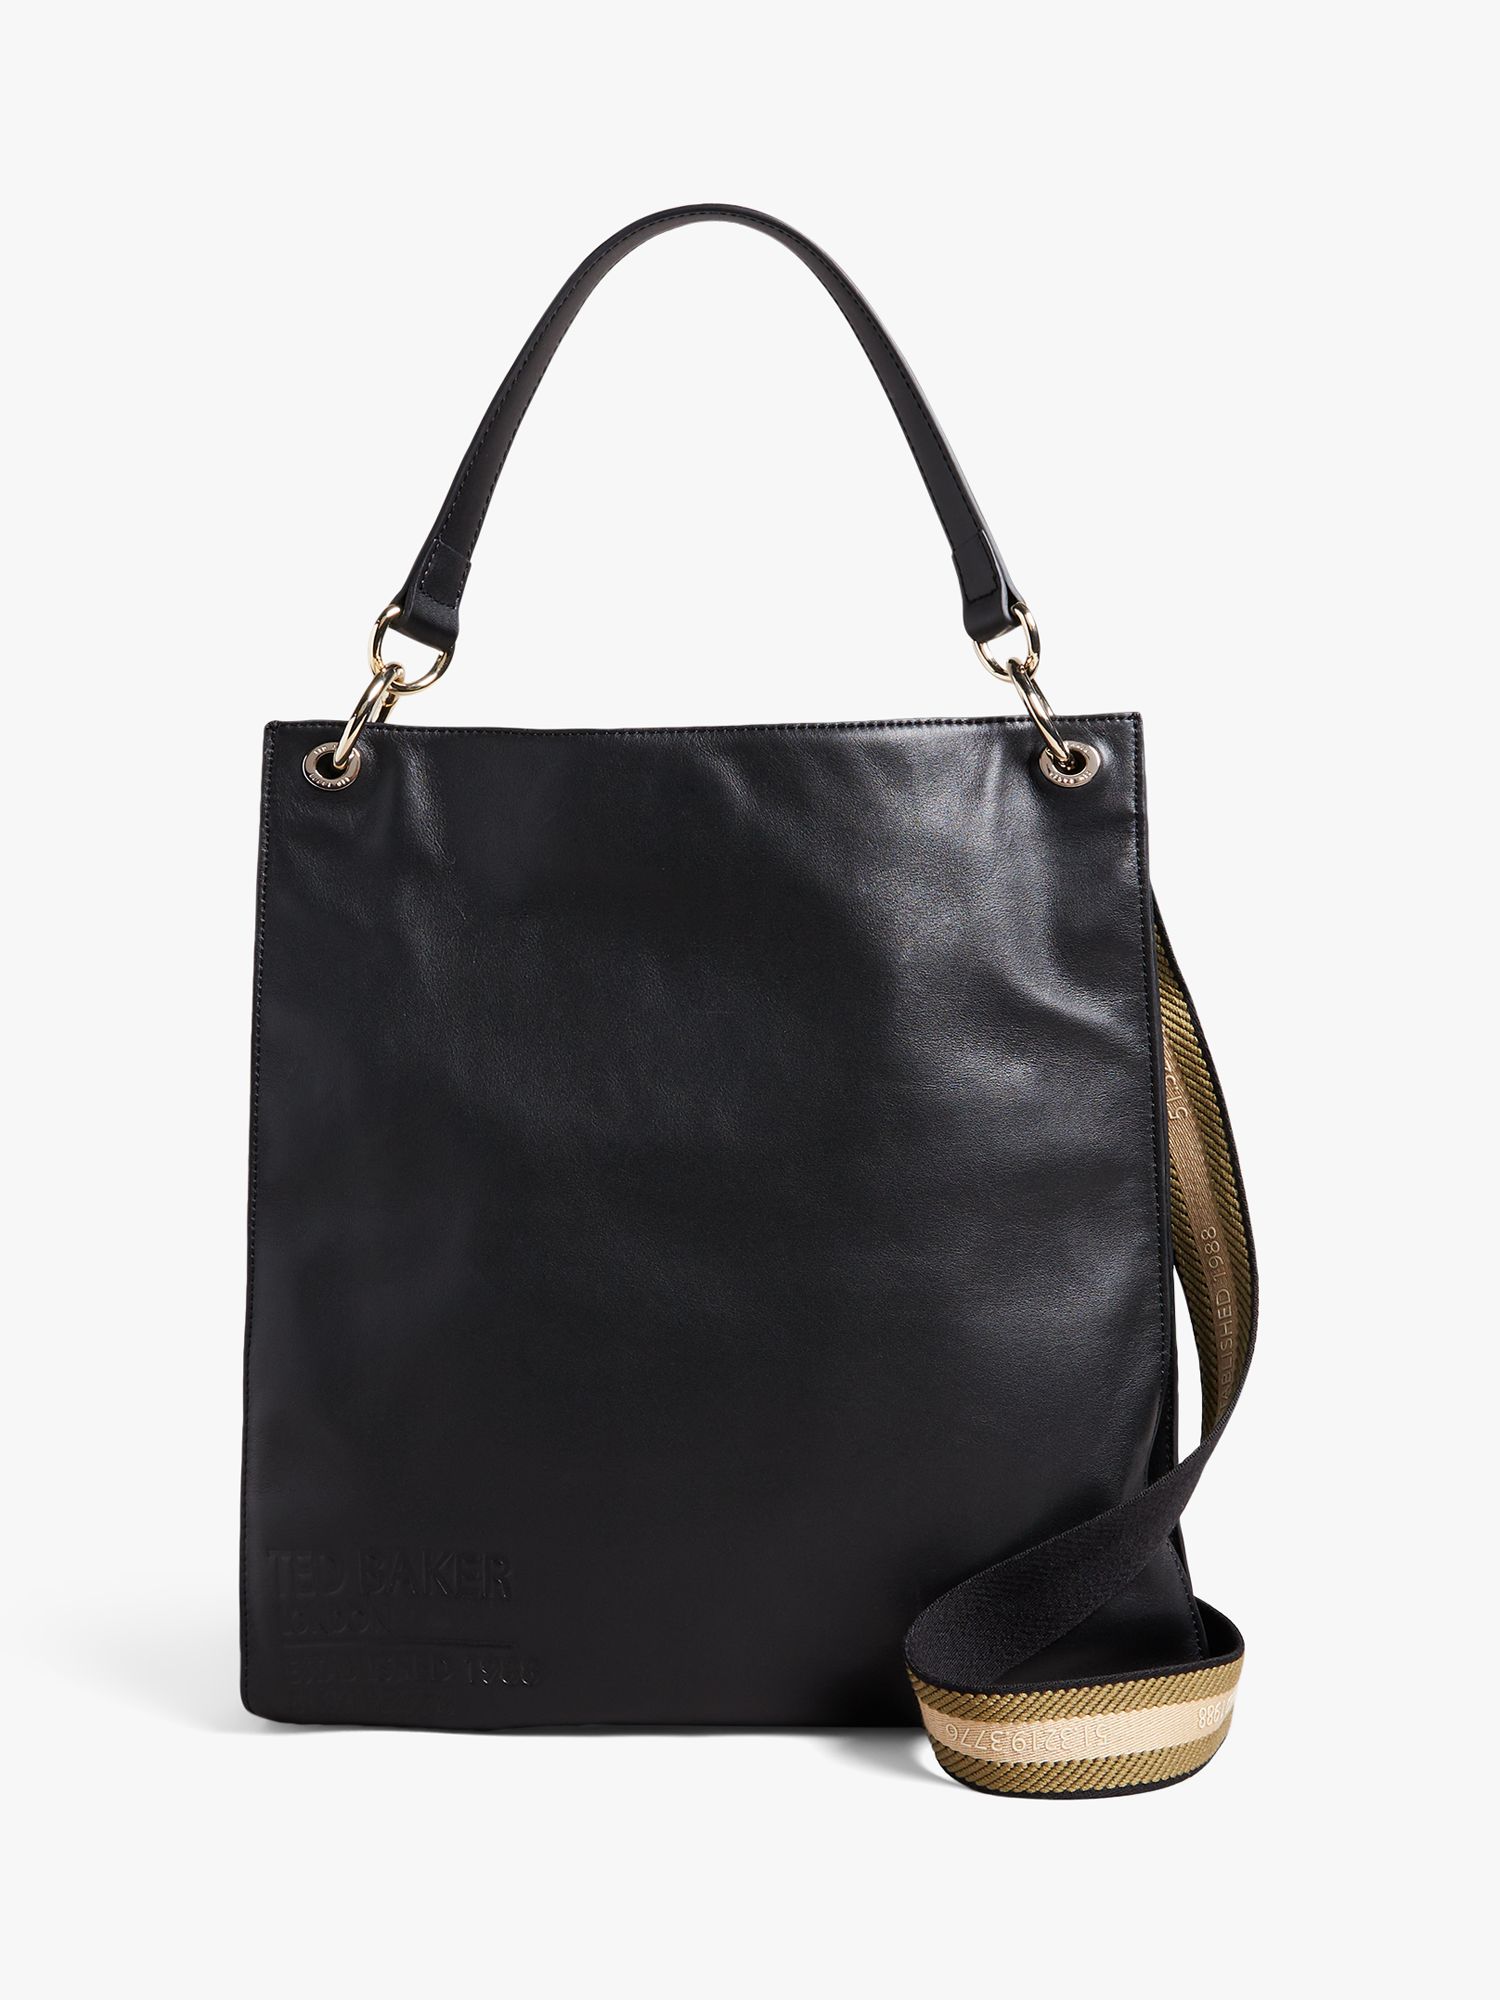 Ted Baker Darcita Leather Double Strap Tote Bag, Black at John Lewis ...